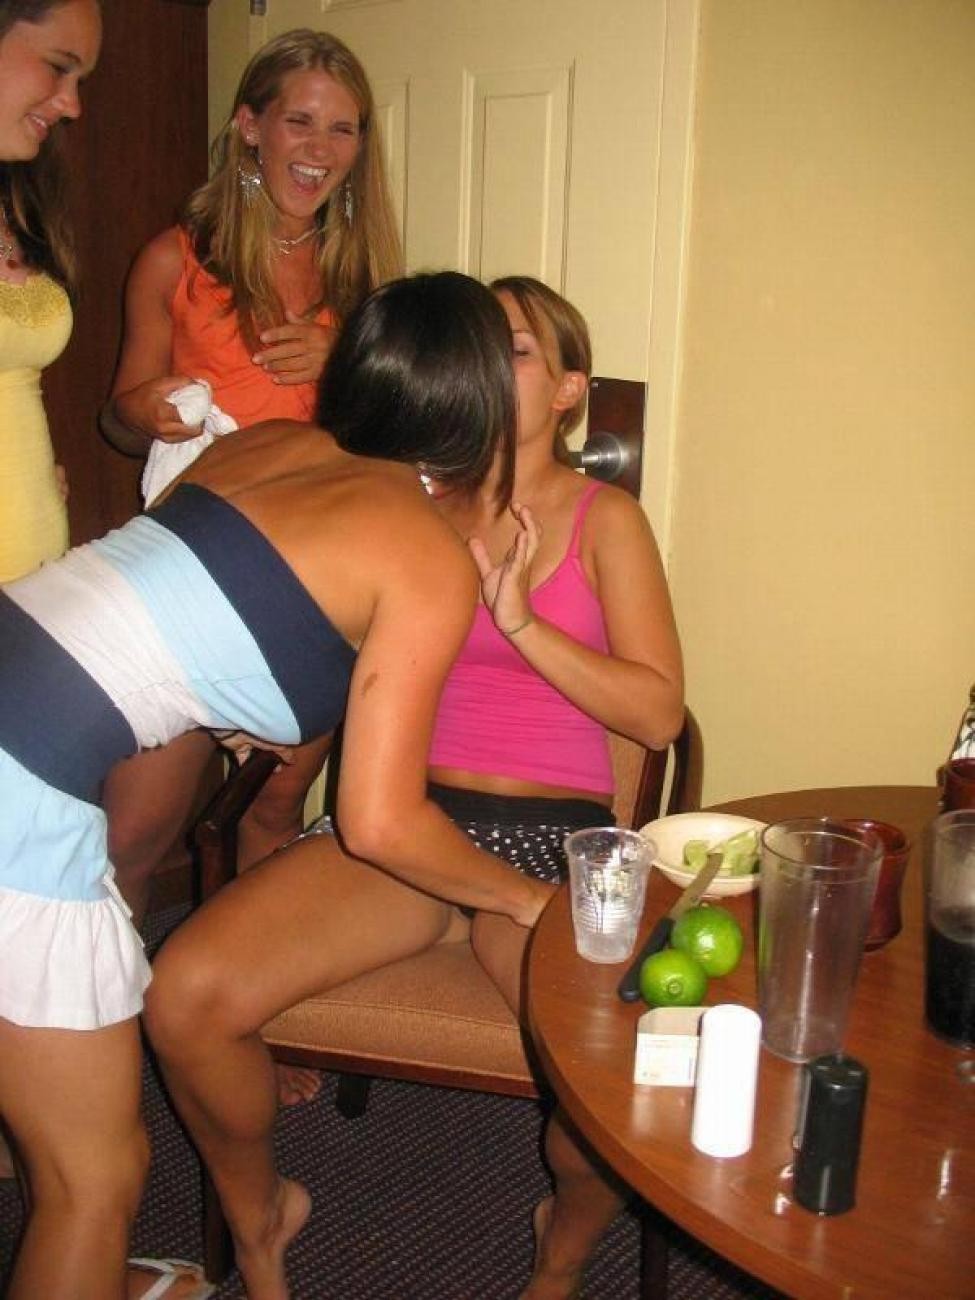 Pics of hot trashed chicks getting wild at parties #77130710